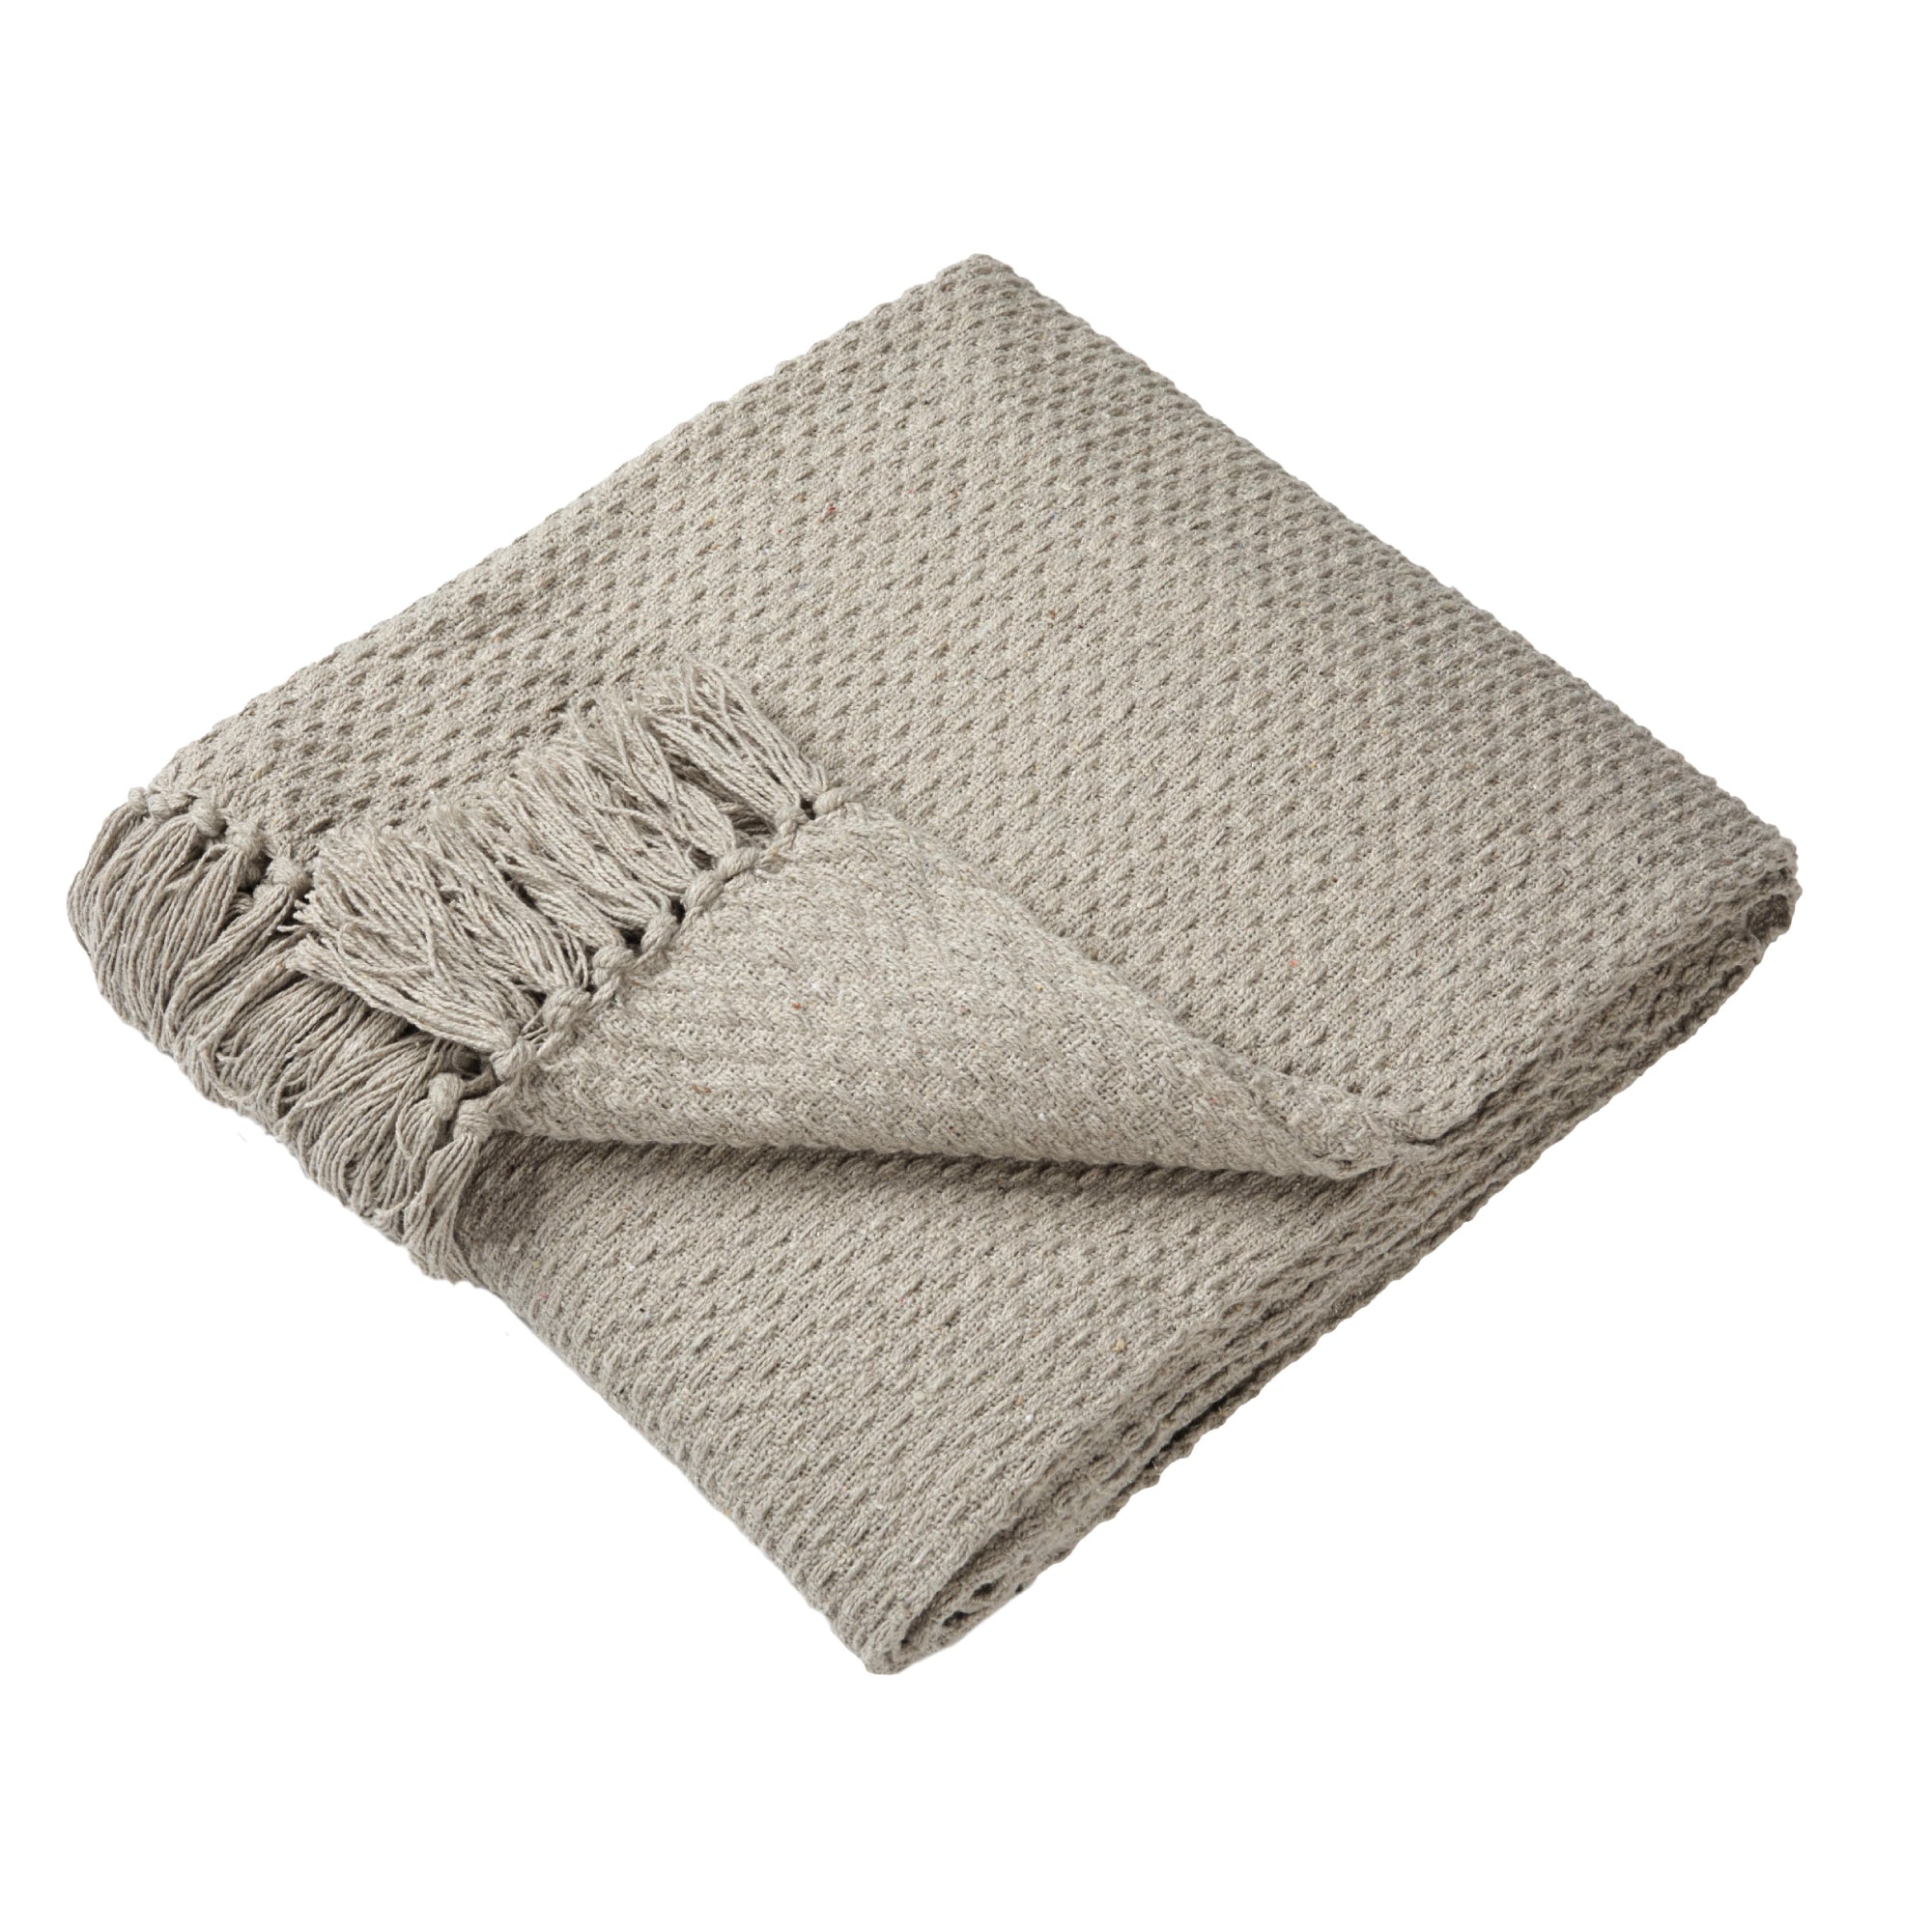 Throw Hayden by Drift Home in Natural